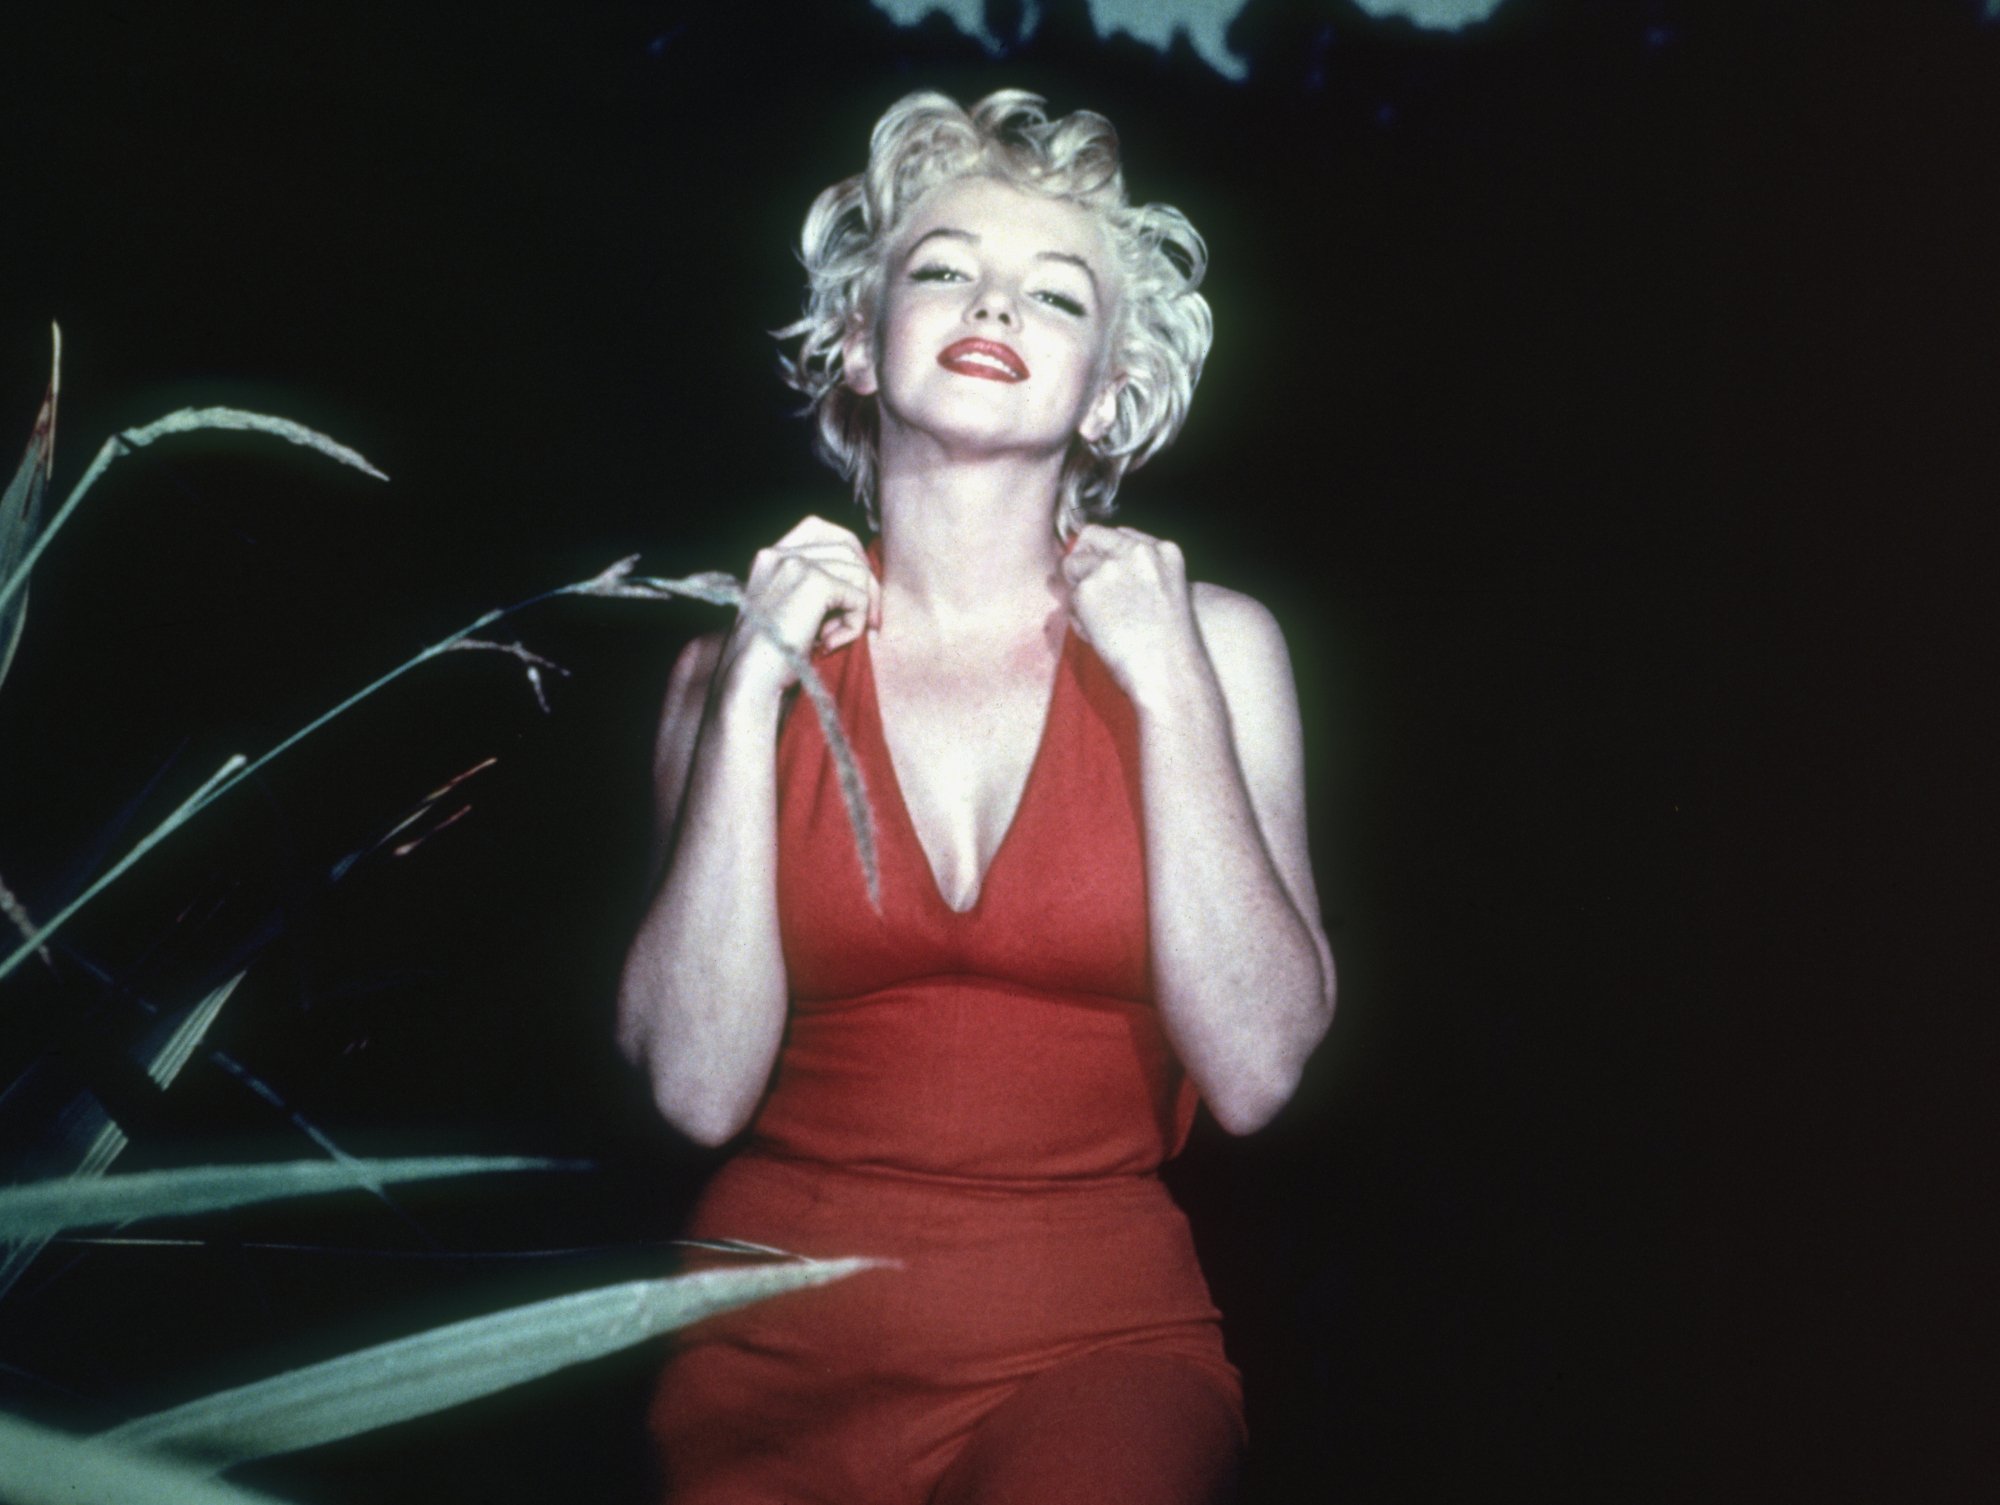 Director Of NC-17 Marilyn Monroe Film 'Blonde': It'll Offend